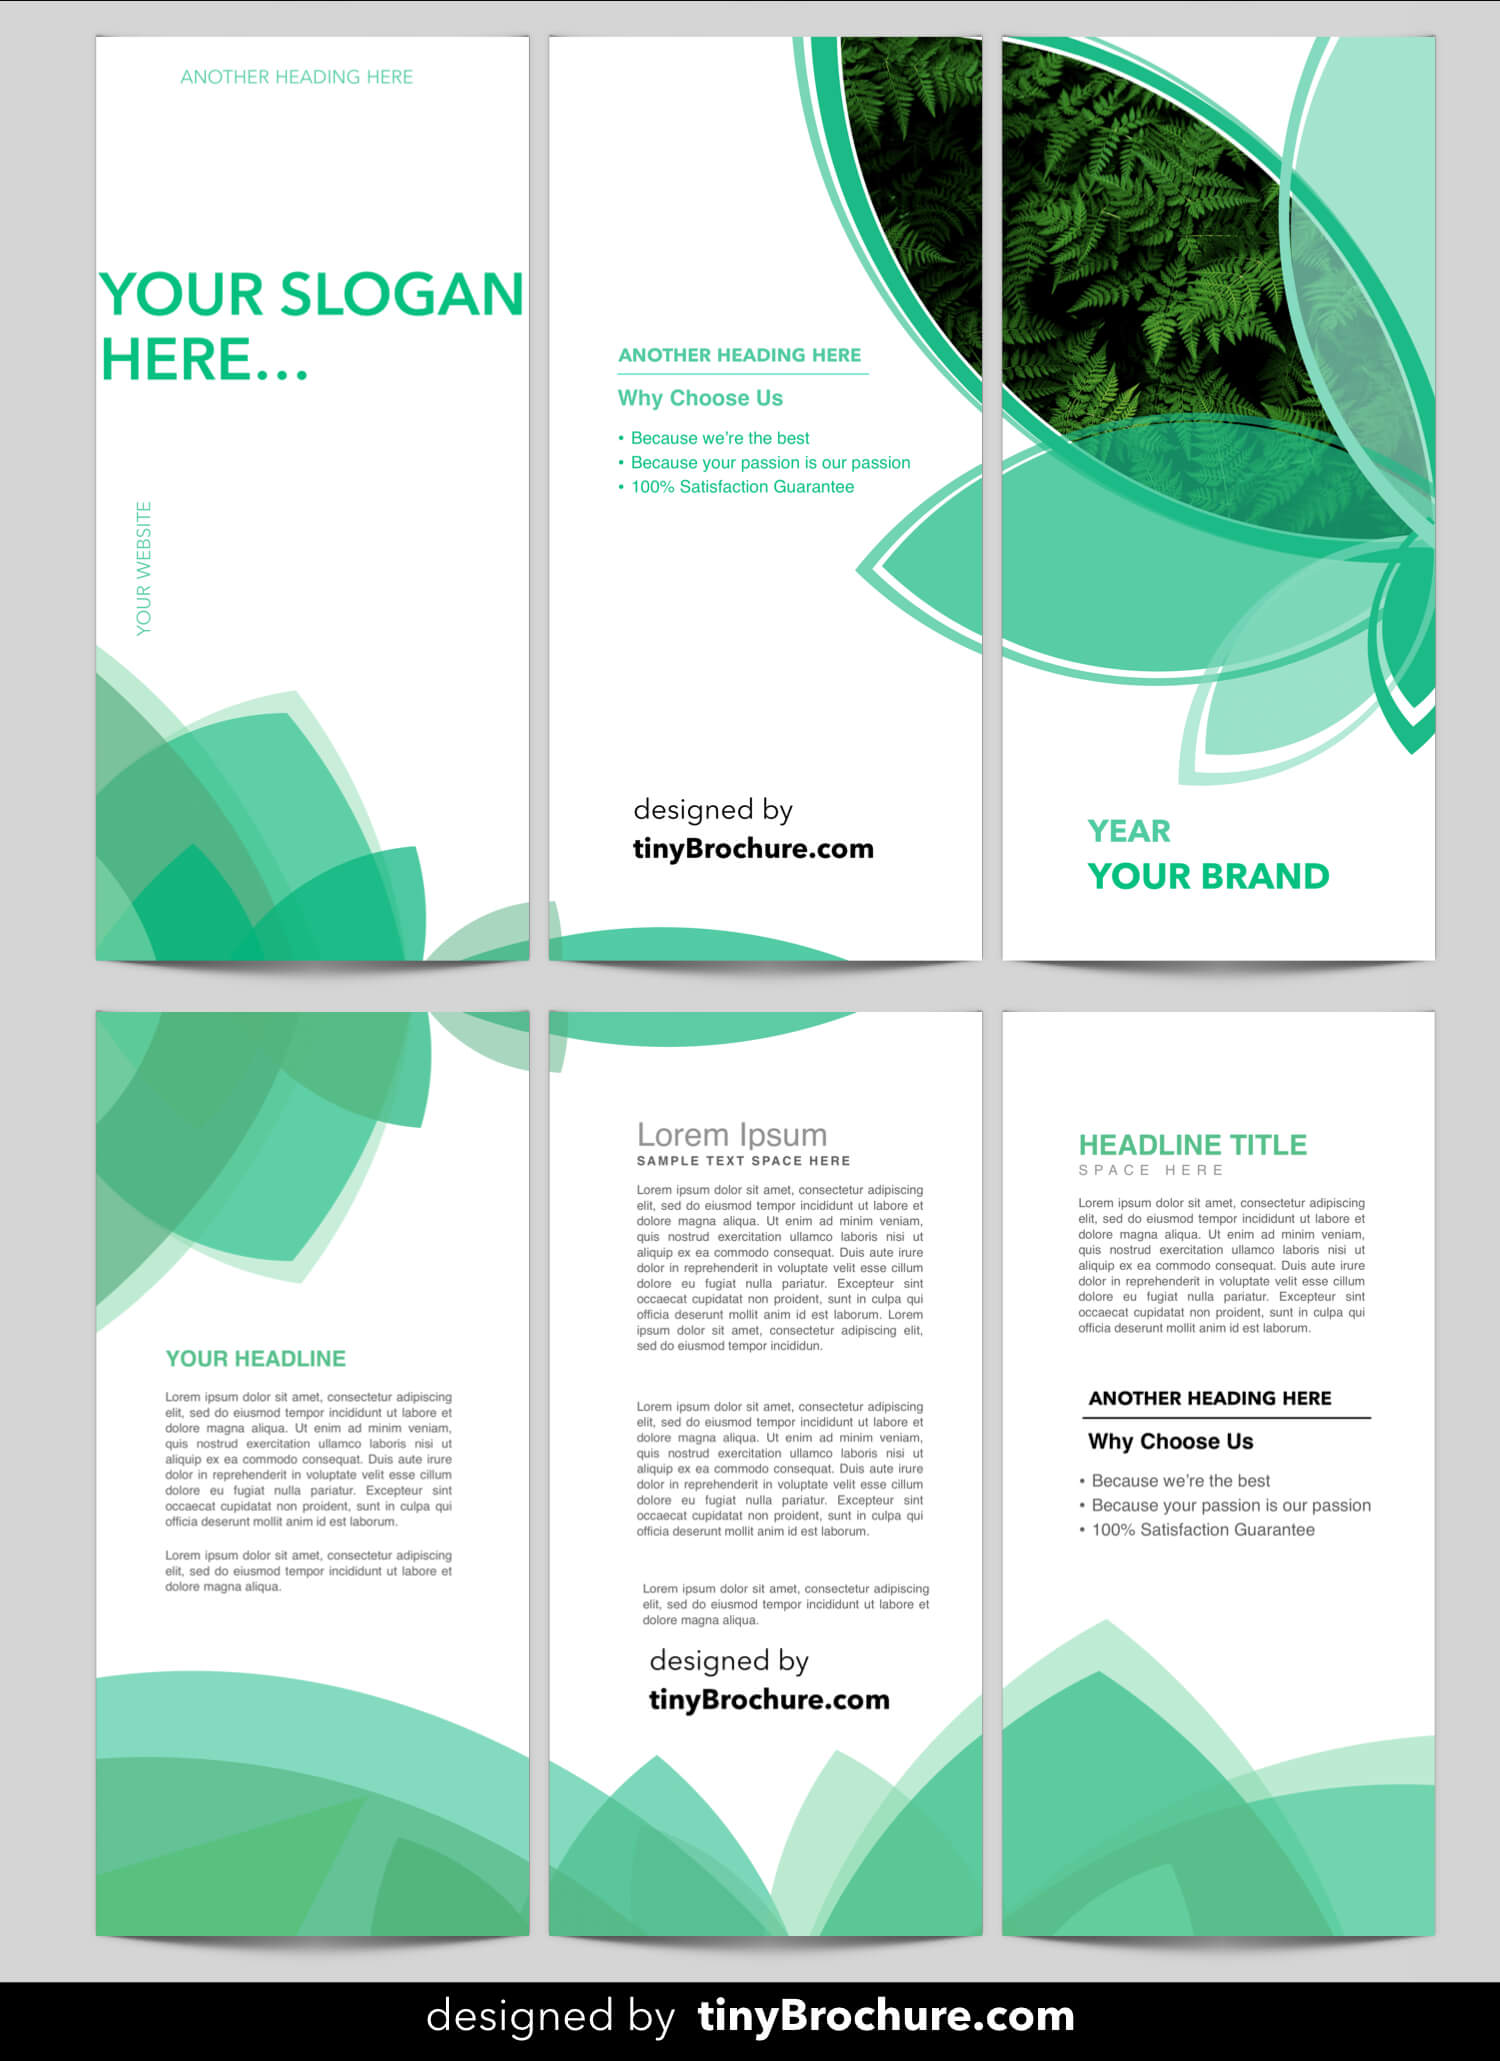 004 Brochure Templates Free Download For Microsoft Word Intended For Word 2013 Brochure Template